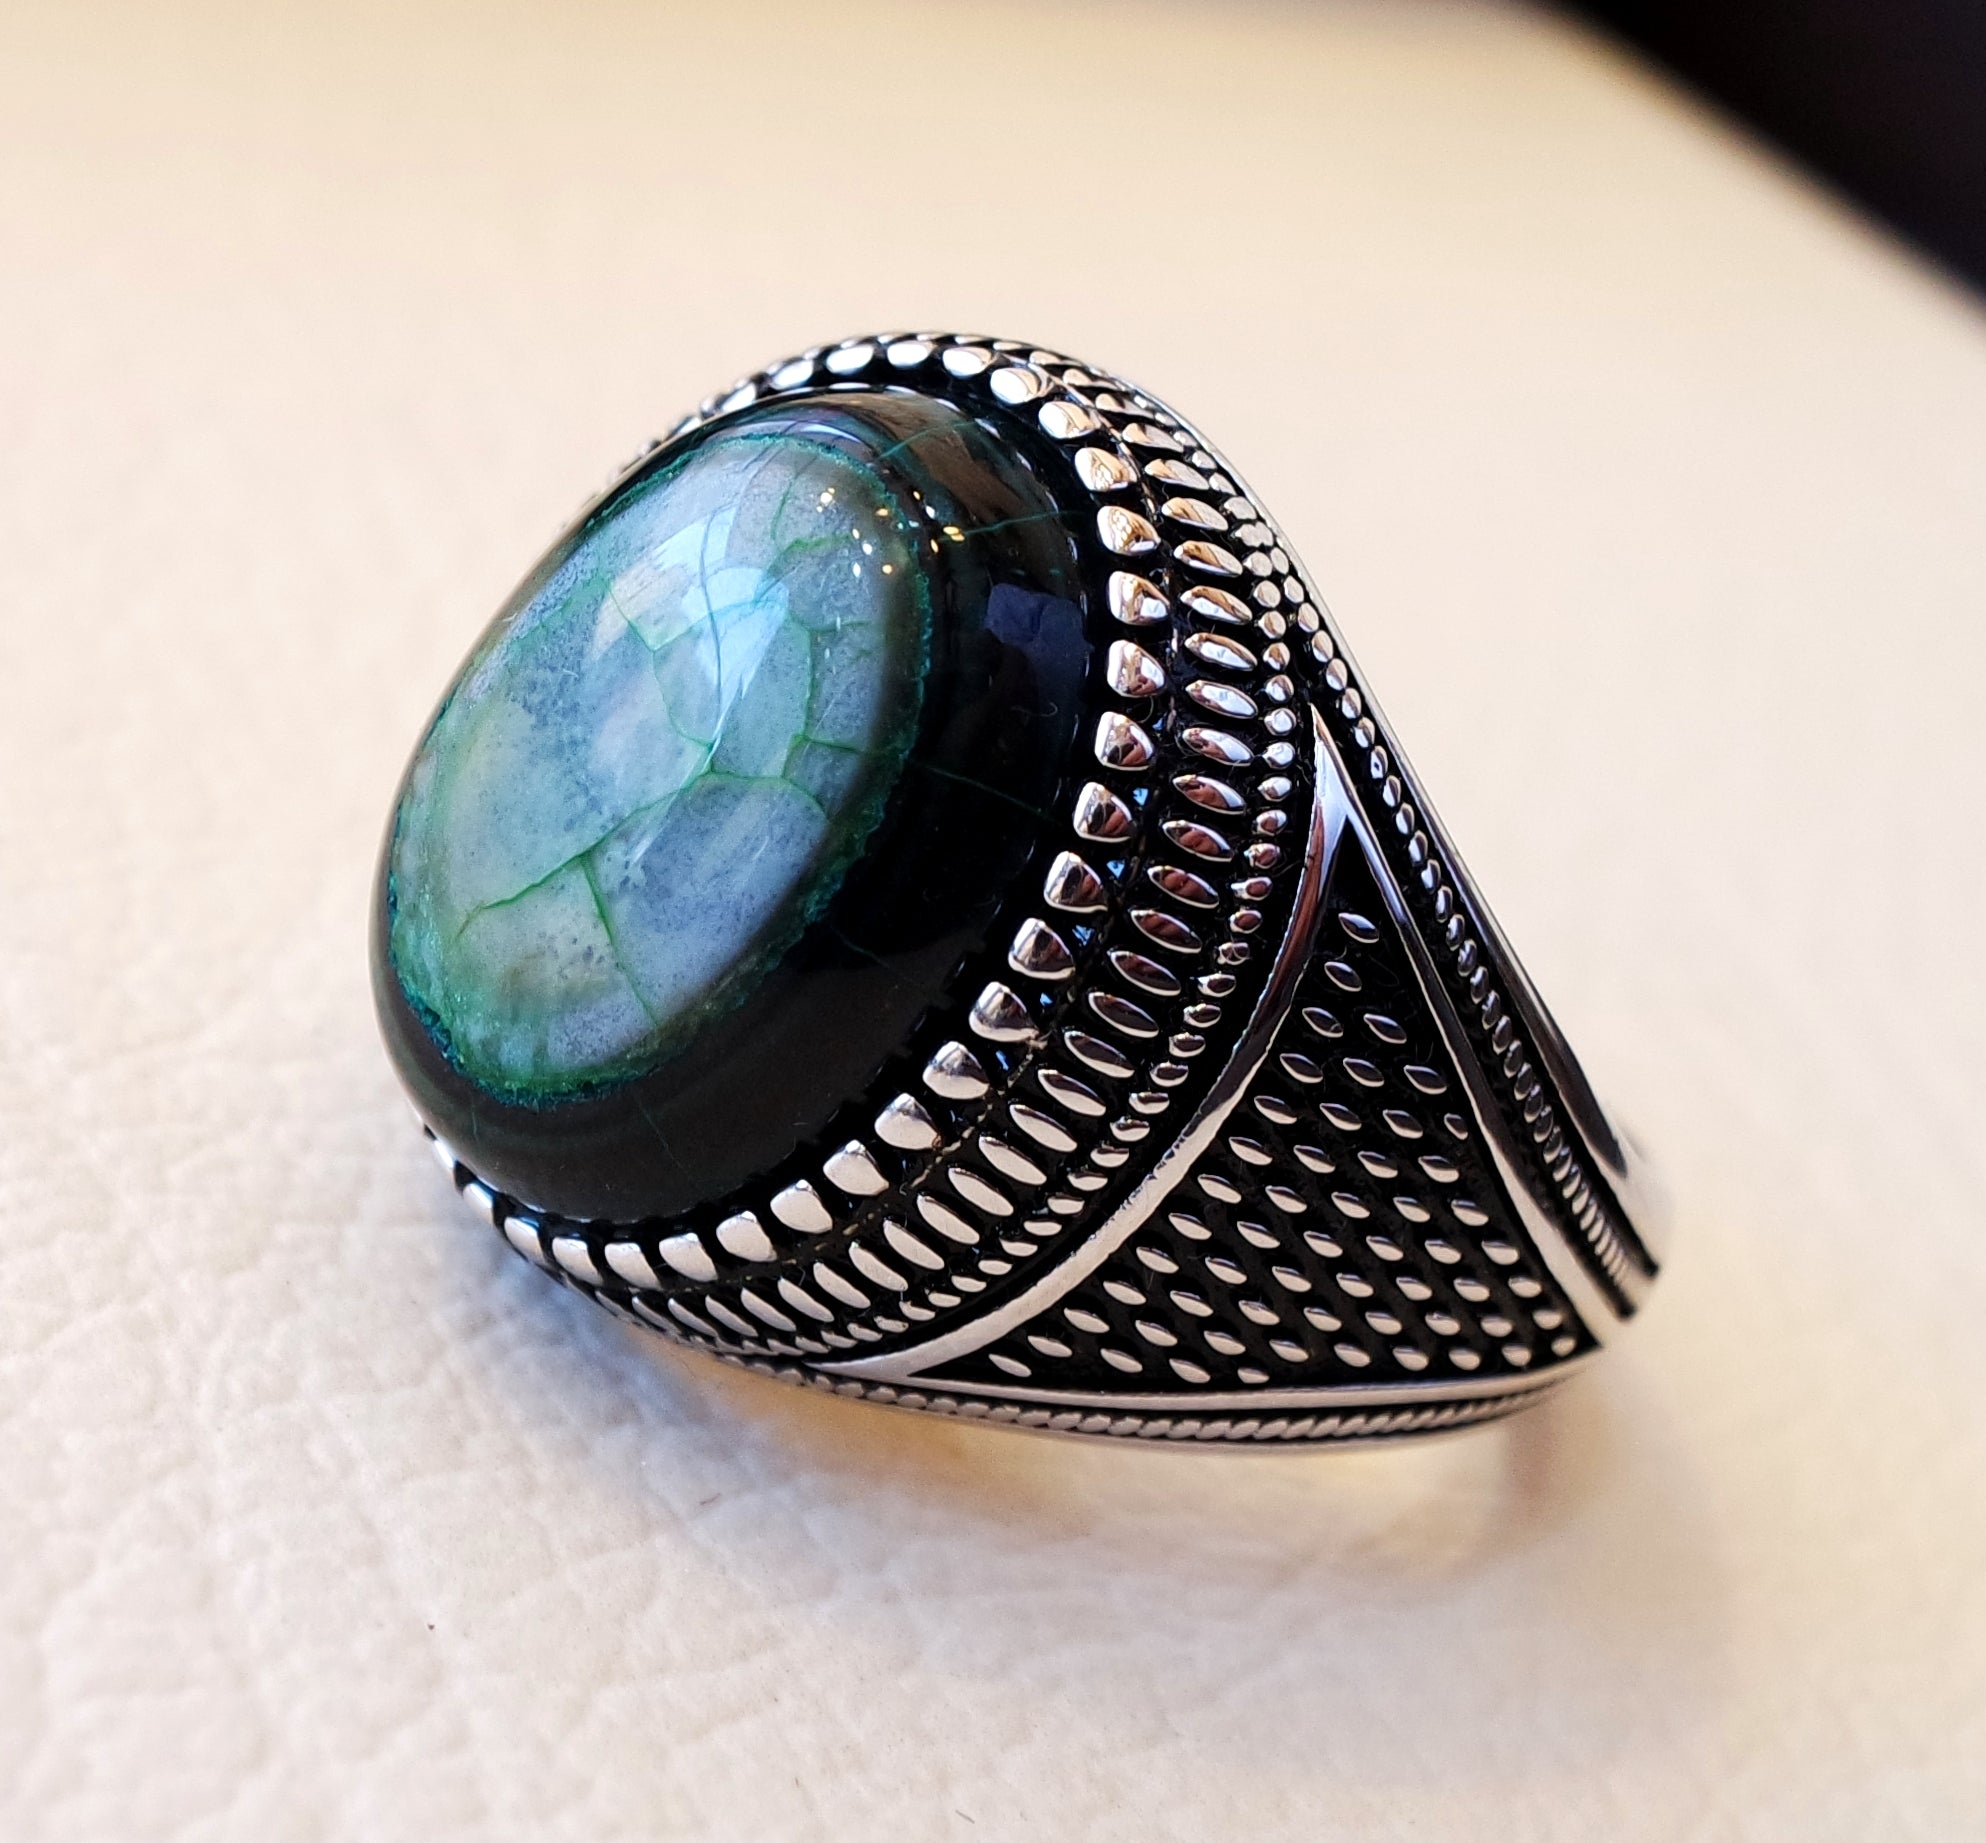 Akeek agate green natural aqeeq stone semi precious men ring sterling silver 925 all sizes antique ottoman middle east style jewelry